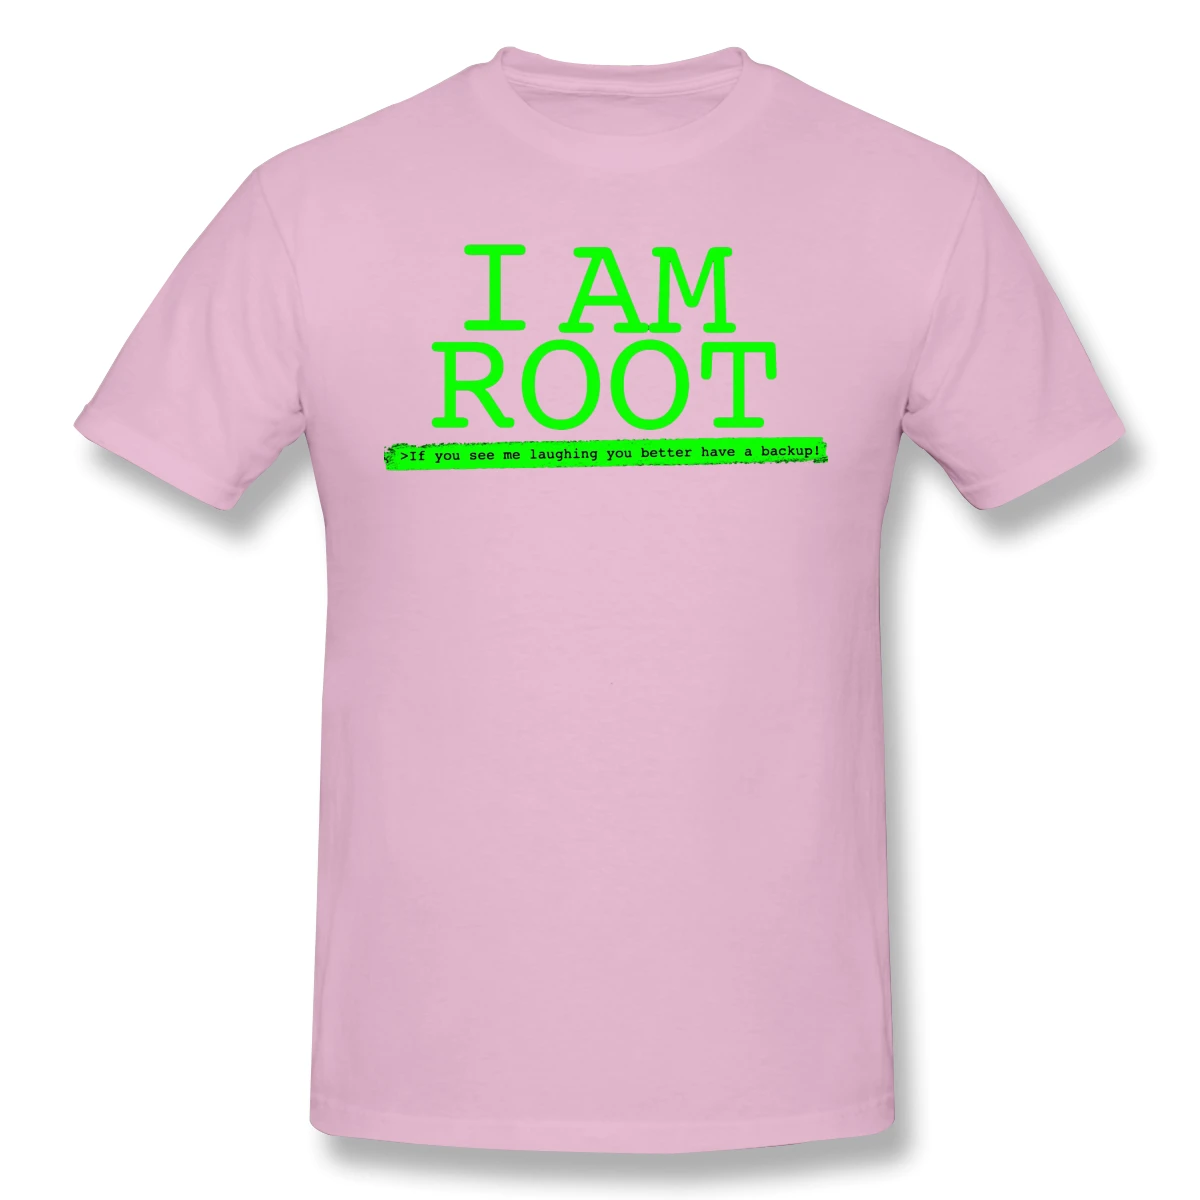 I am rooted. Линукс одежда. I am root. Bash clothes. Майка root binary.